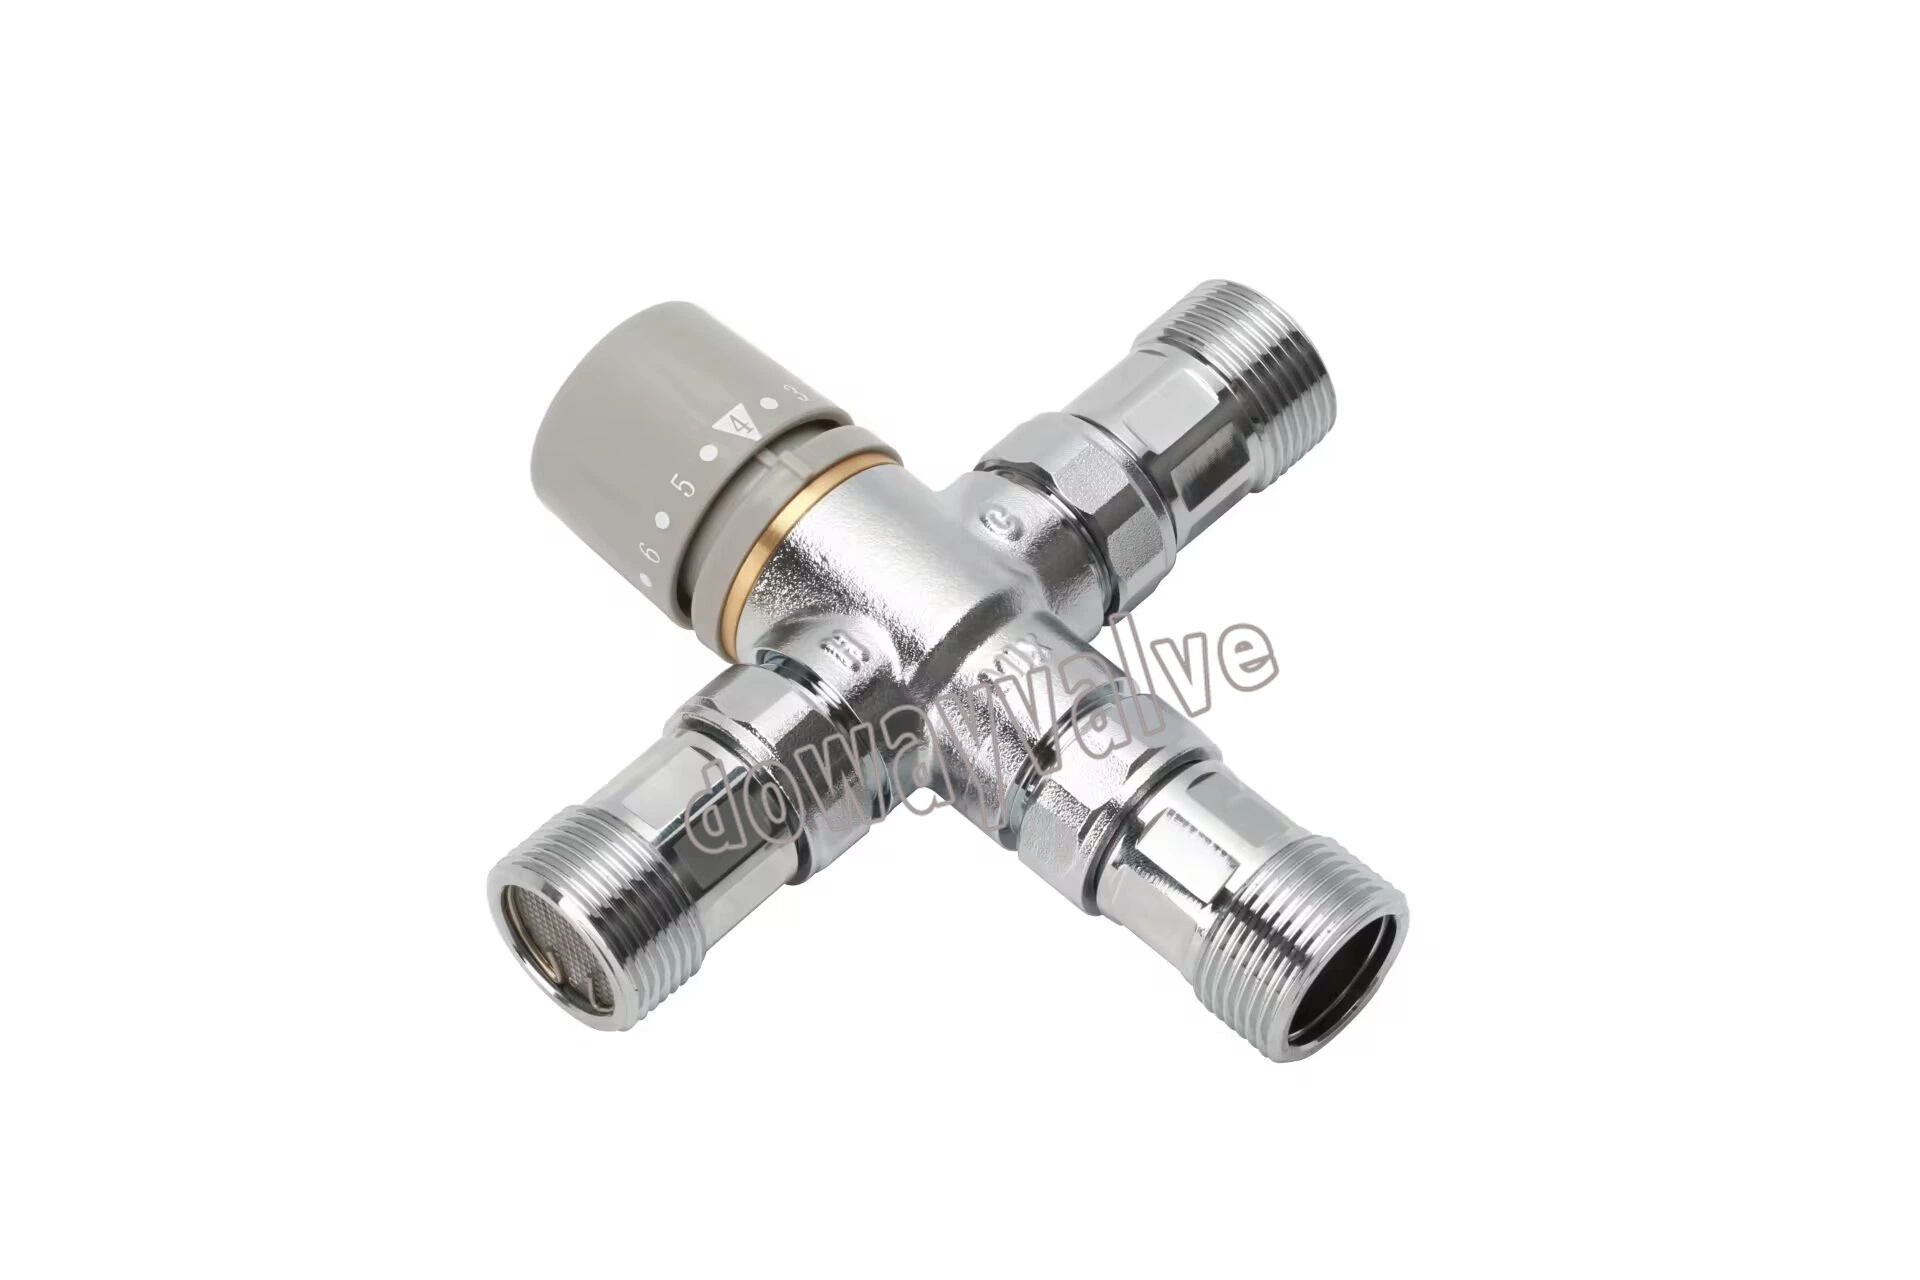 Factory Copper Thermostatic Mixing Valve for Solar Heating System Water Pipe Bathroom Kitchen